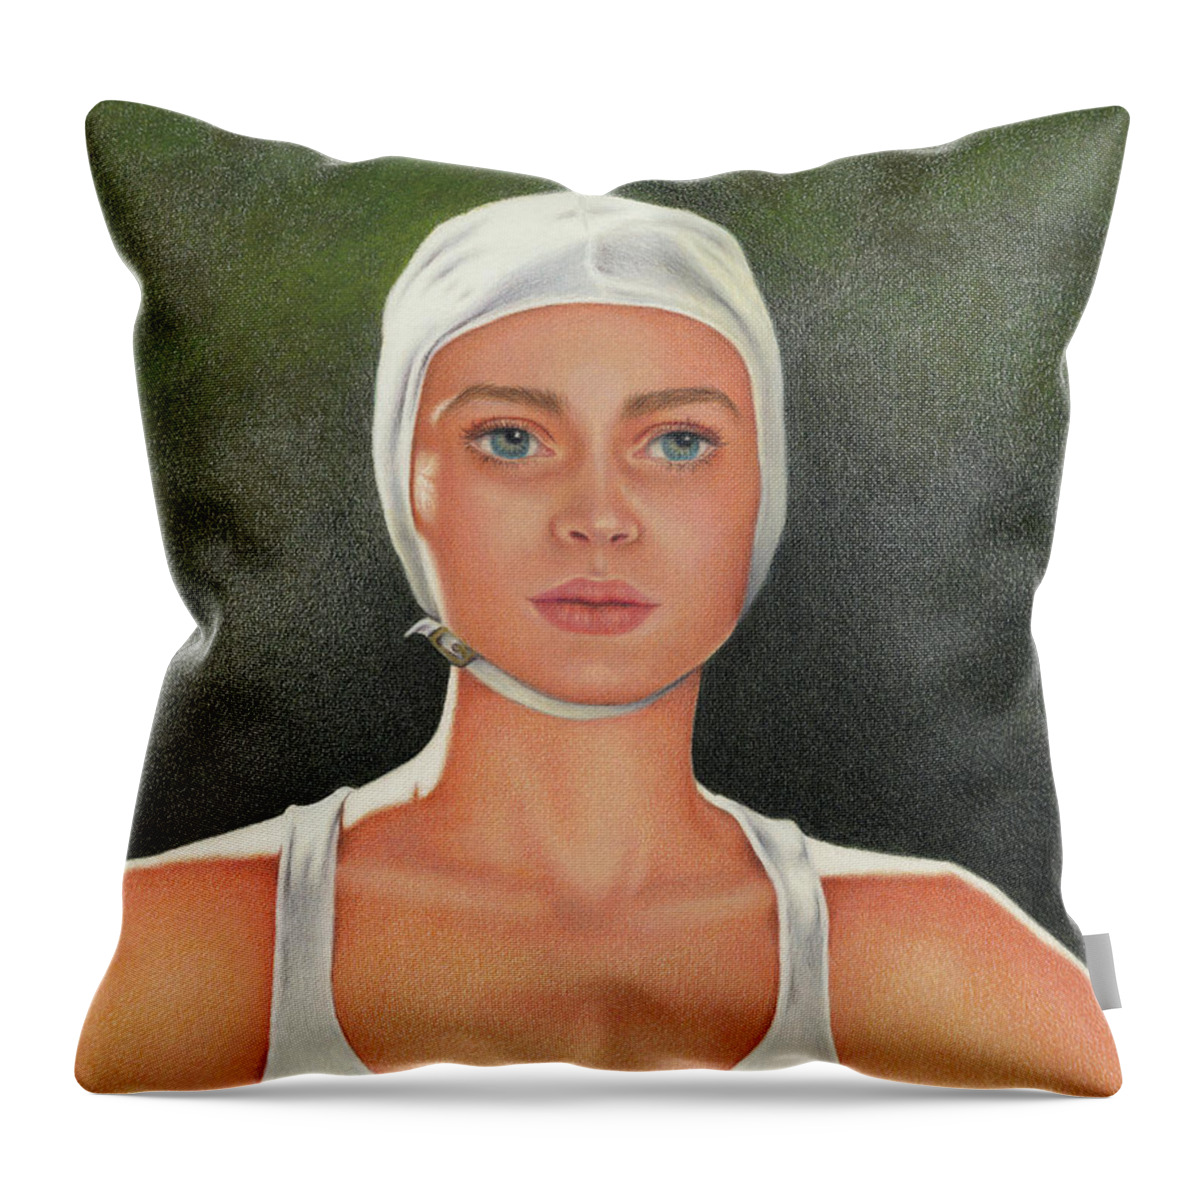 Swimming; Competition; Diving; Vintage Swimwear; Bathing Beauties; White Bathing Cap; White Swimsuit; Blue Eyes Throw Pillow featuring the painting The Competition by Valerie Evans